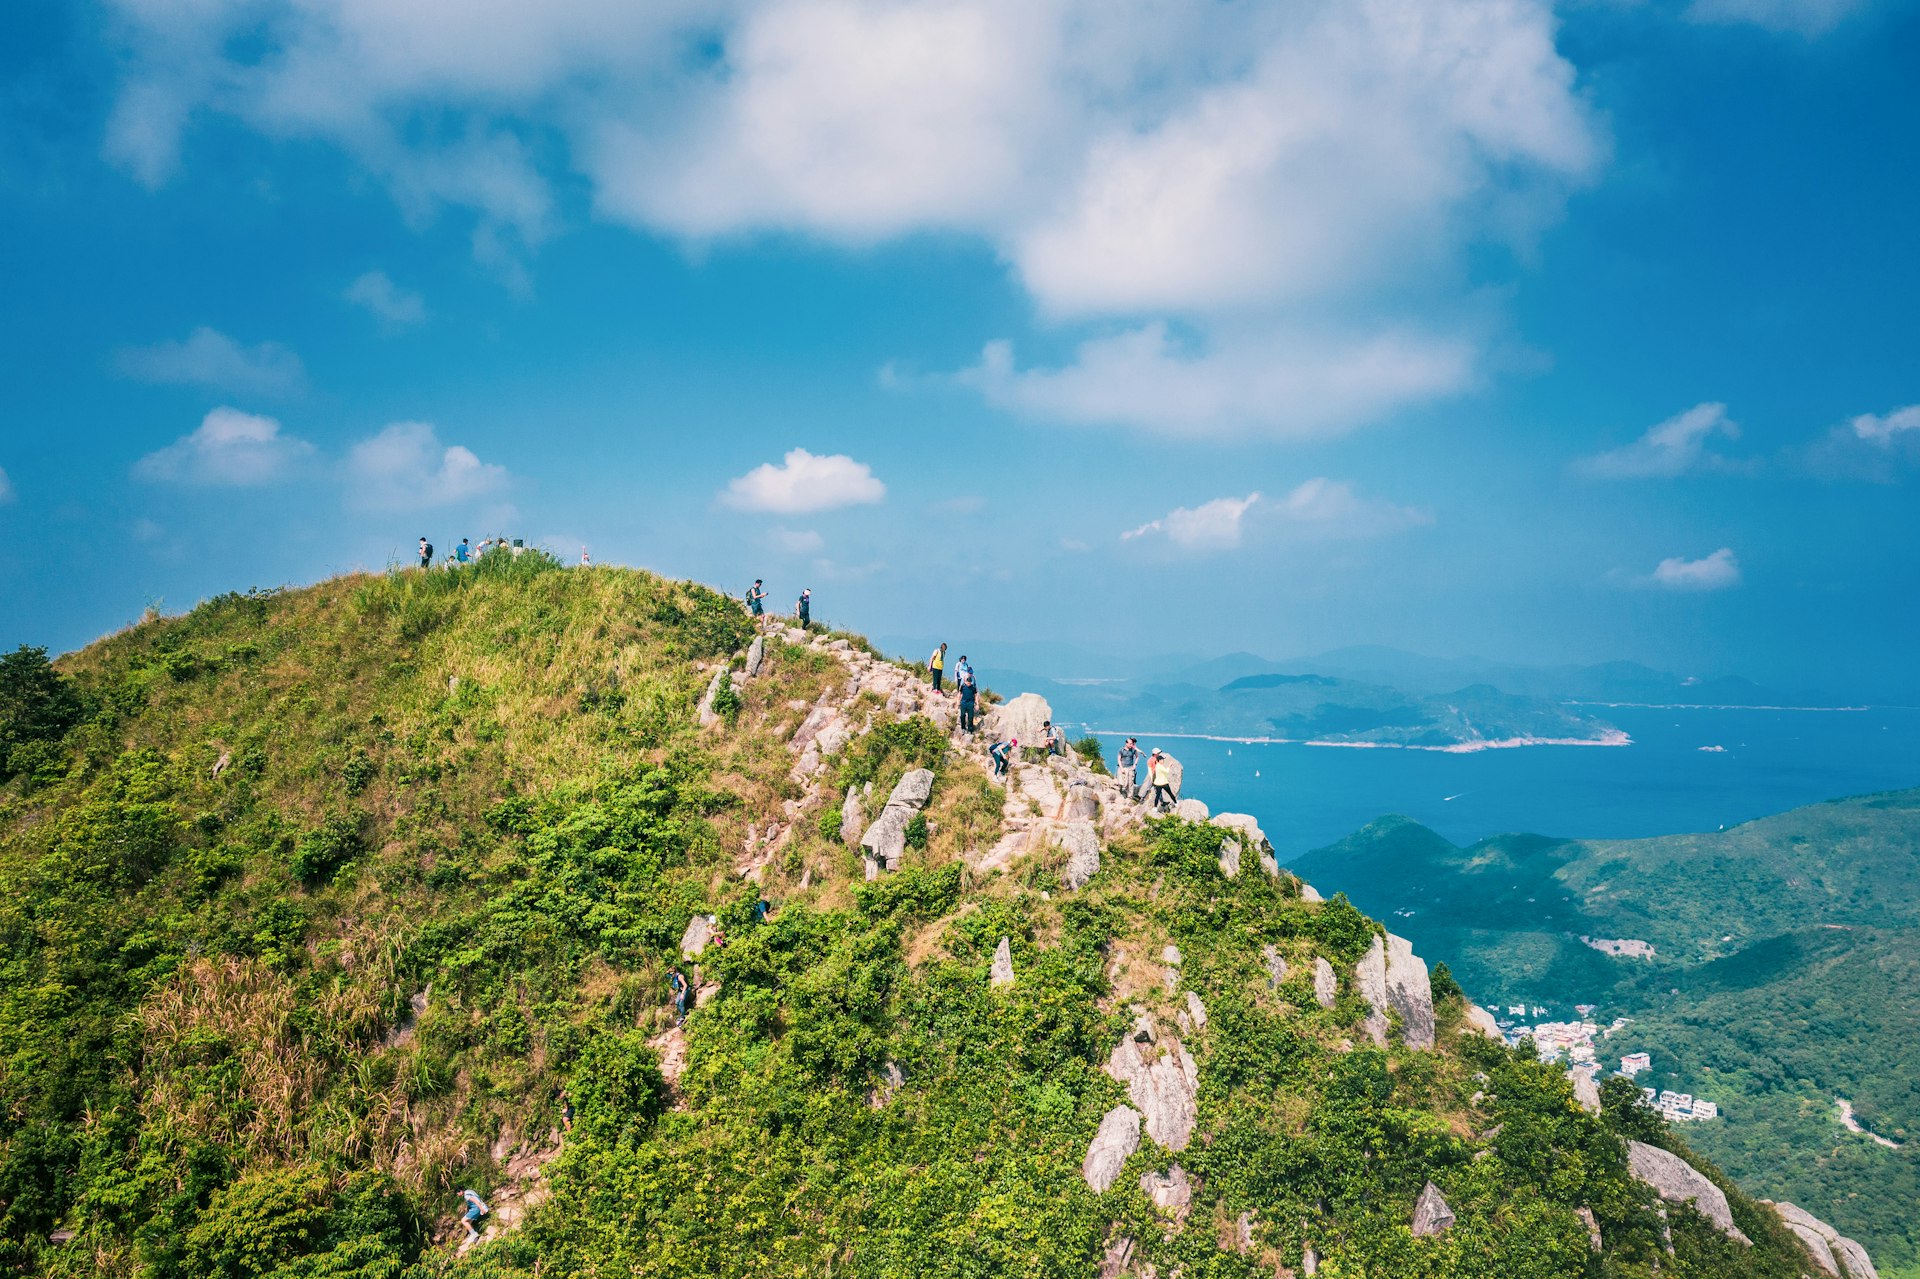 People walking on a path on a jagged mountain on a sunny day in Sai Kung, Hong Kong